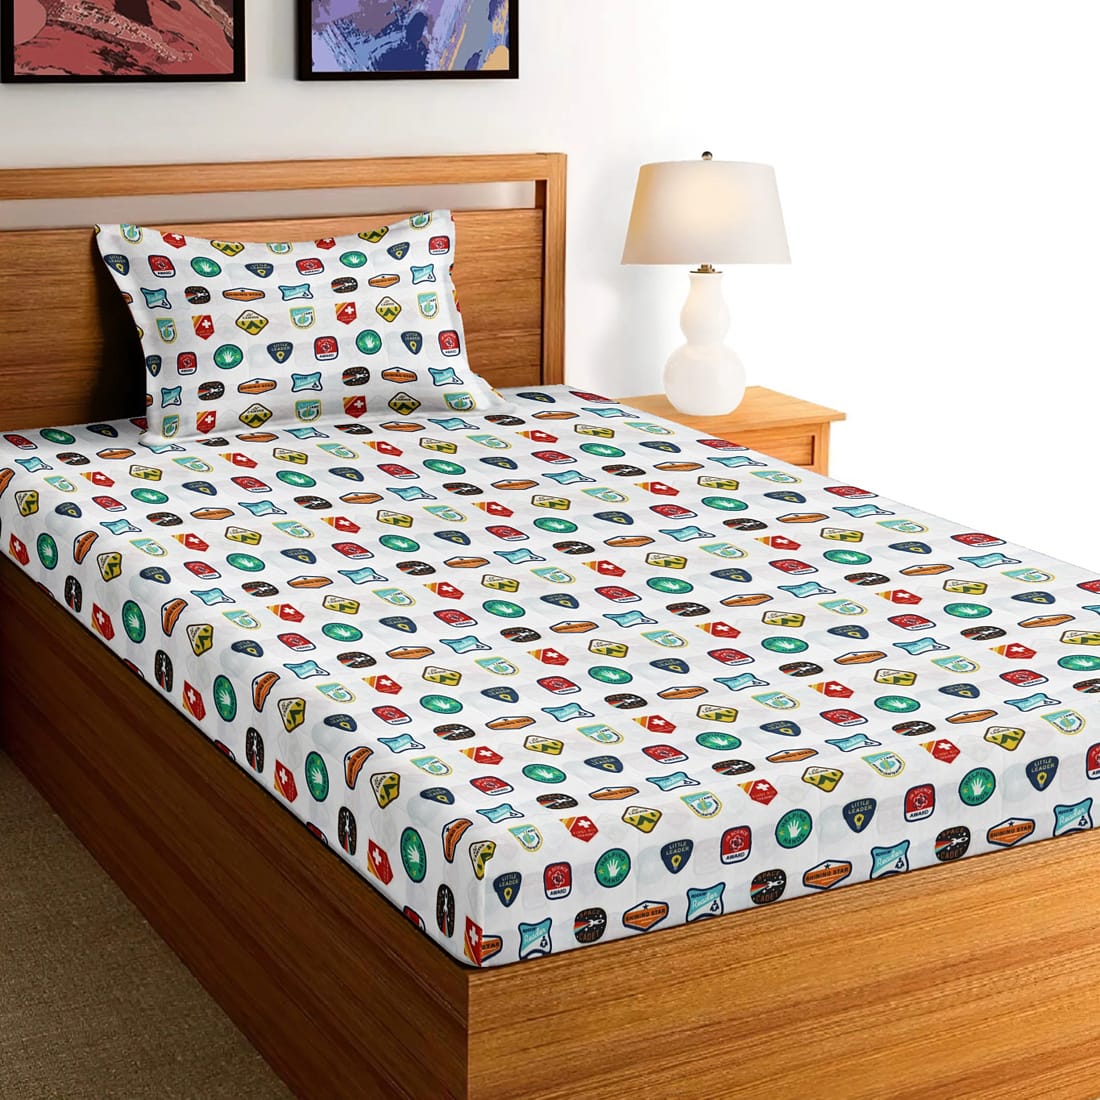 Soft Cotton Digital Print Single Fitted Bedsheet For Kids In Blue